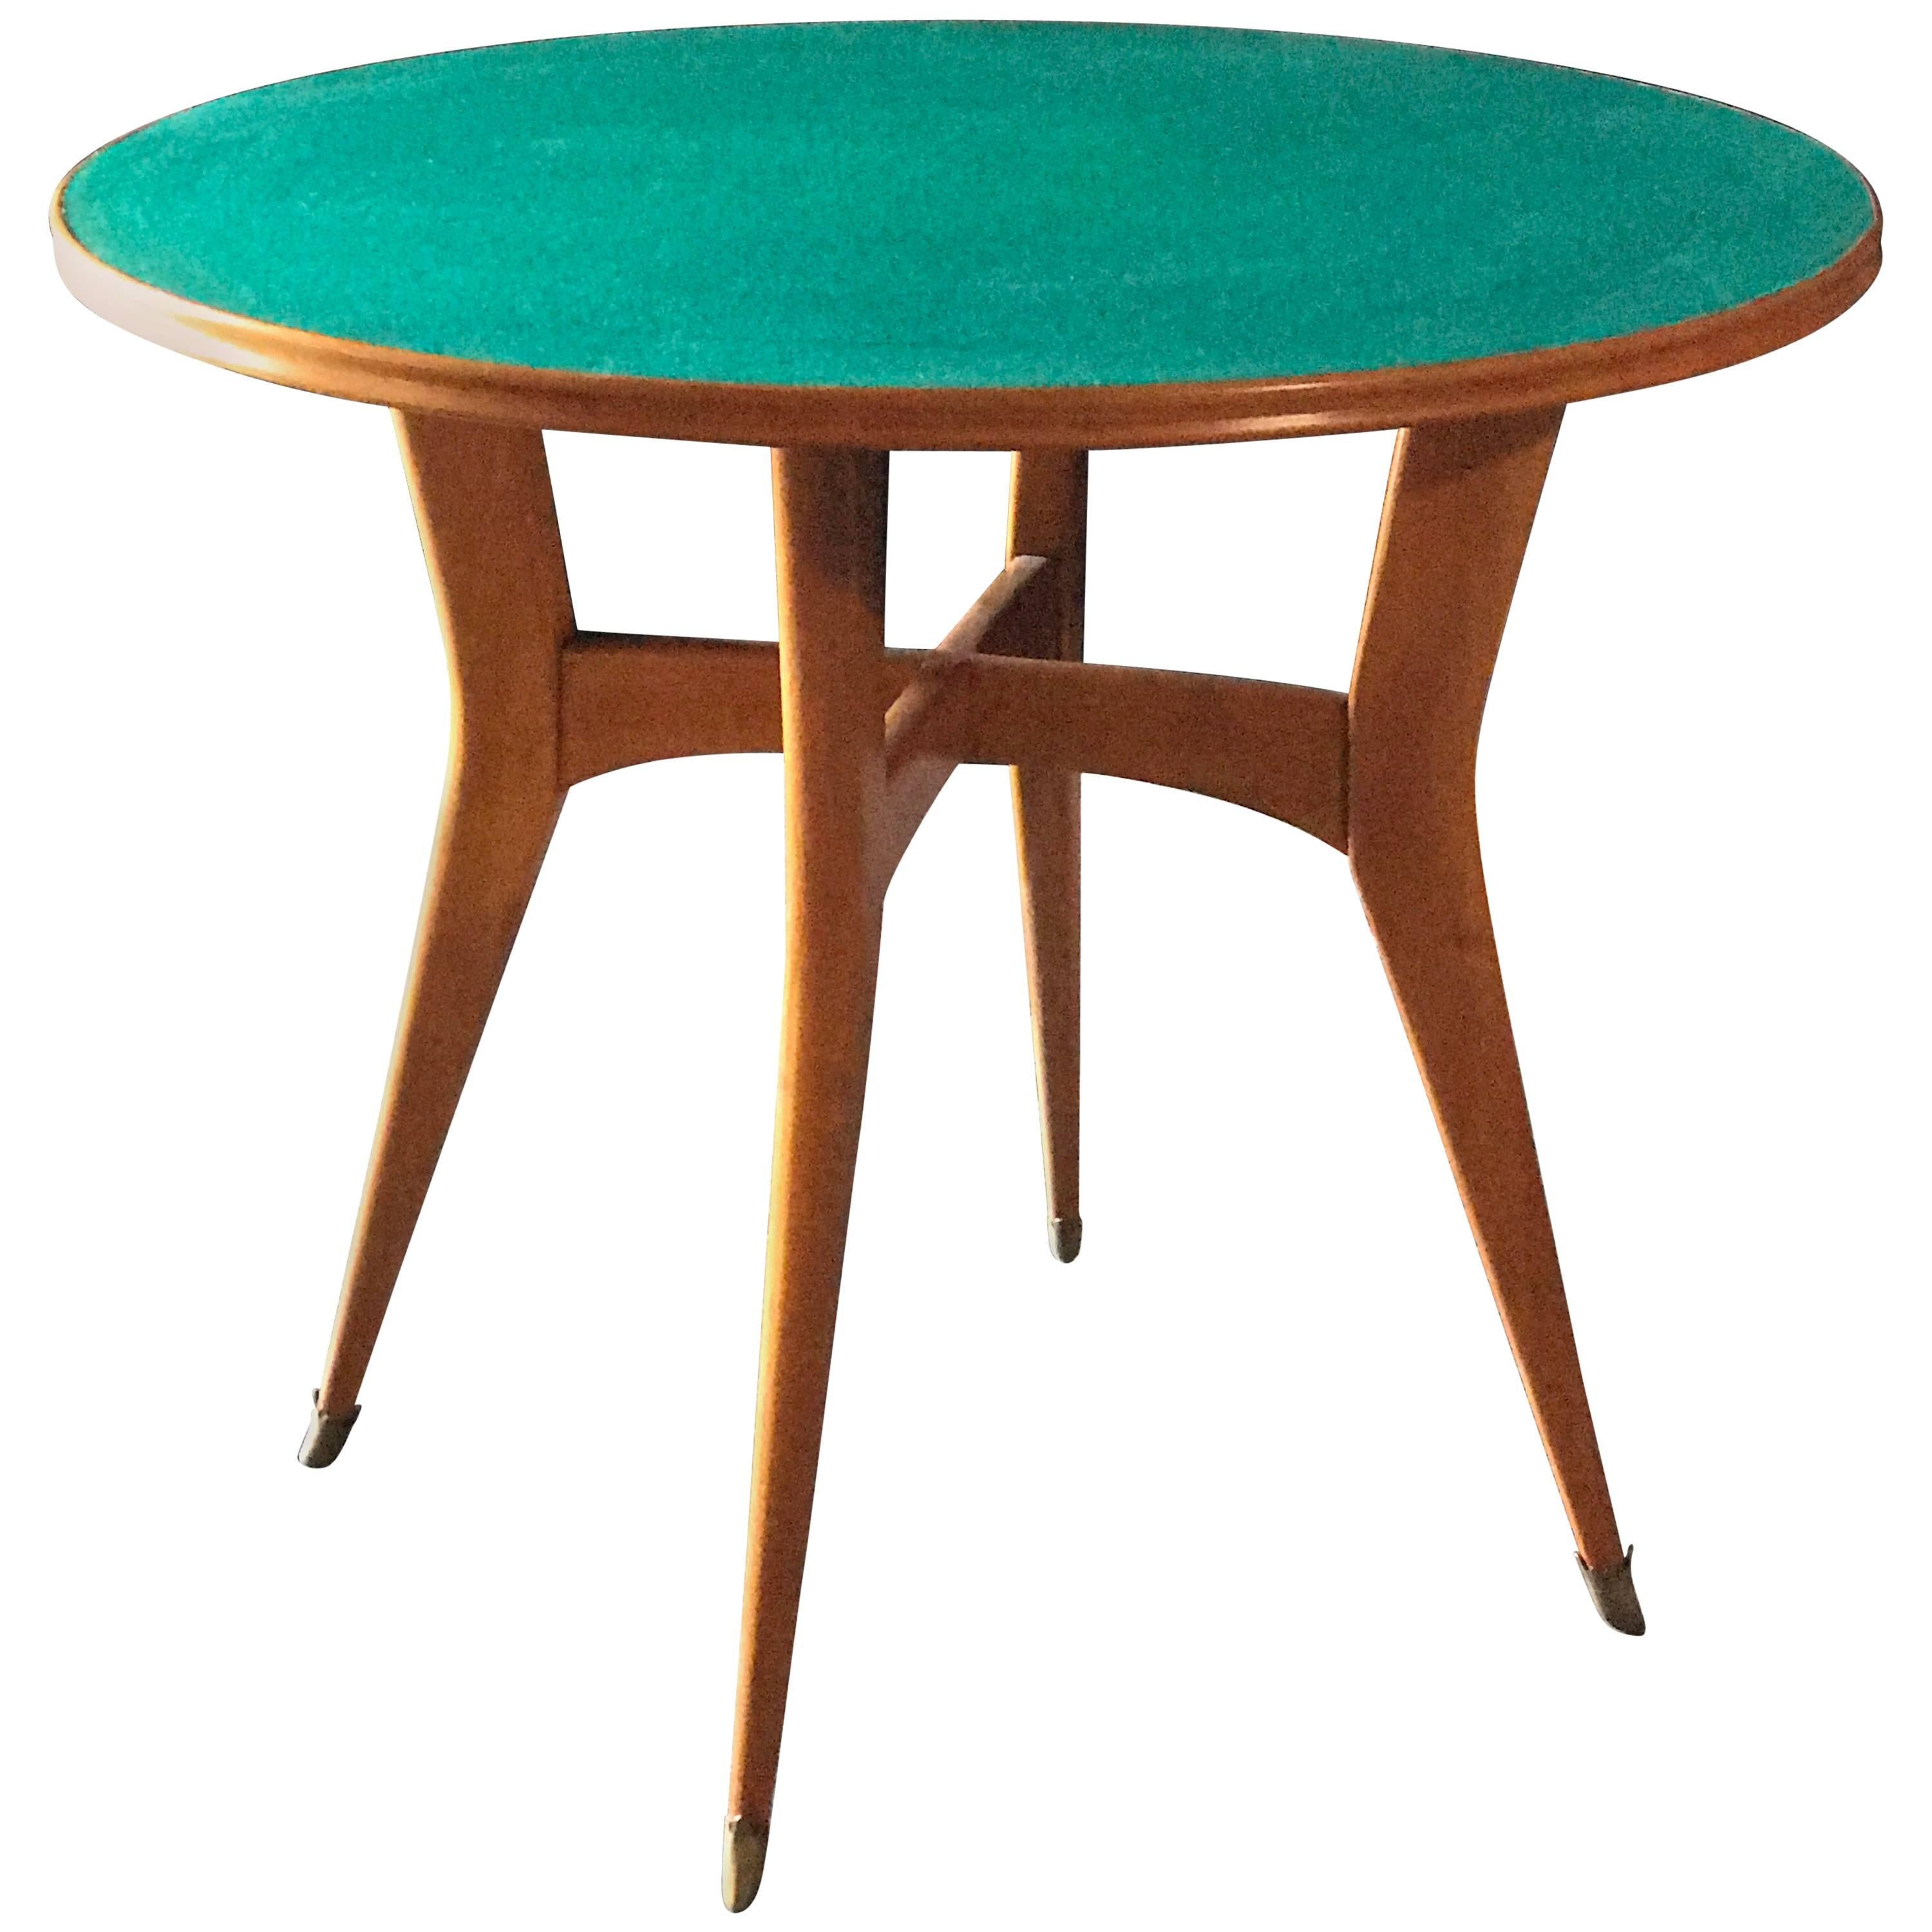 Italian Round Game Table Attributed to Ico Parisi